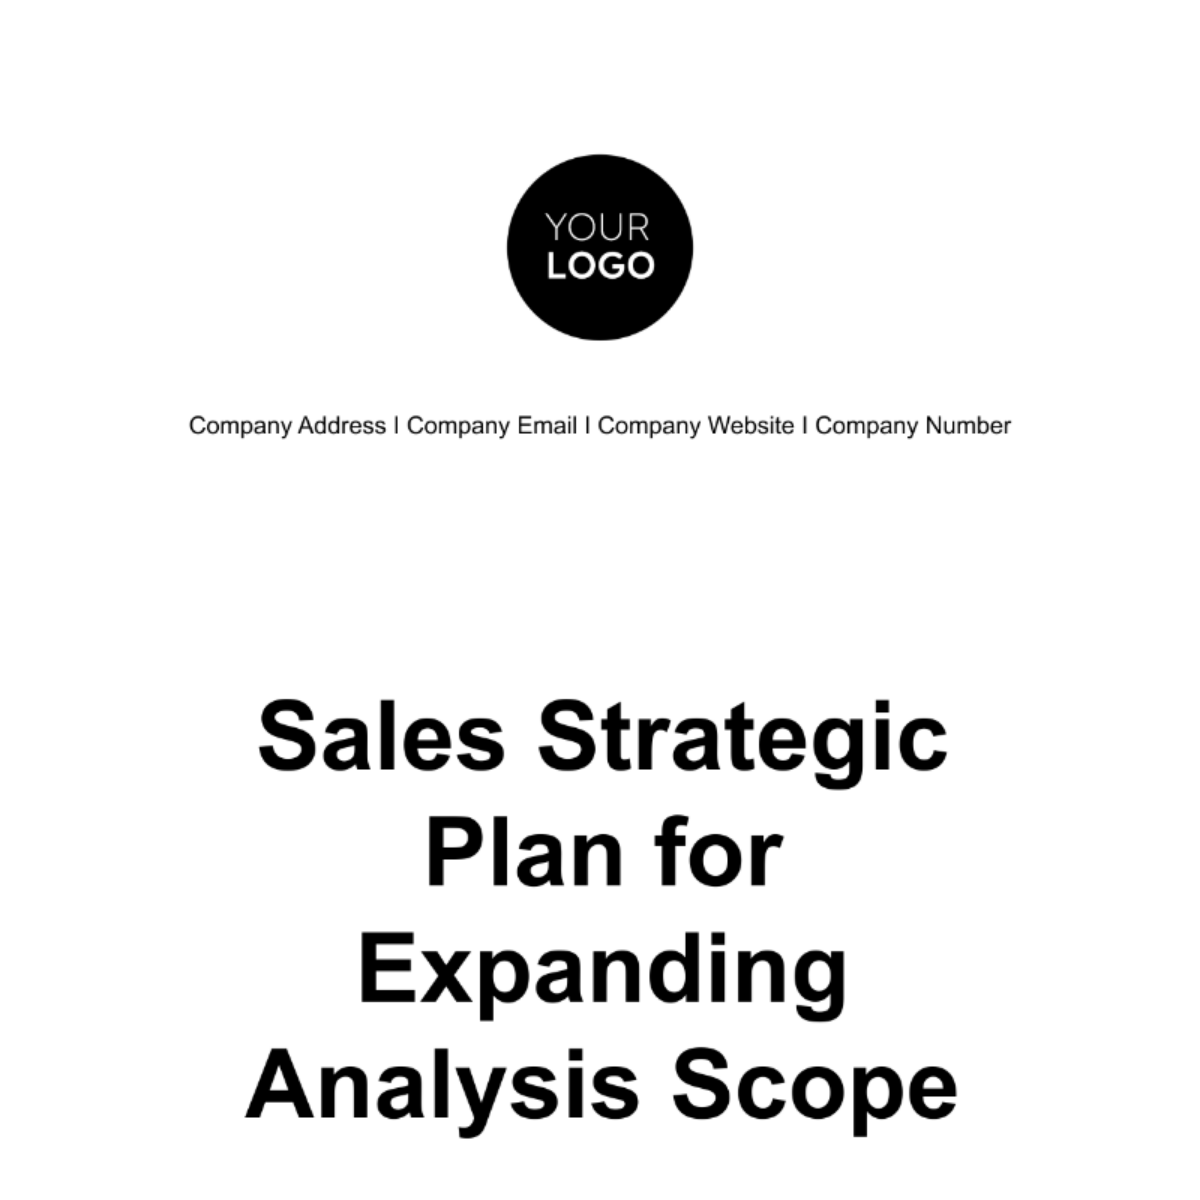 Sales Strategic Plan for Expanding Analysis Scope Template